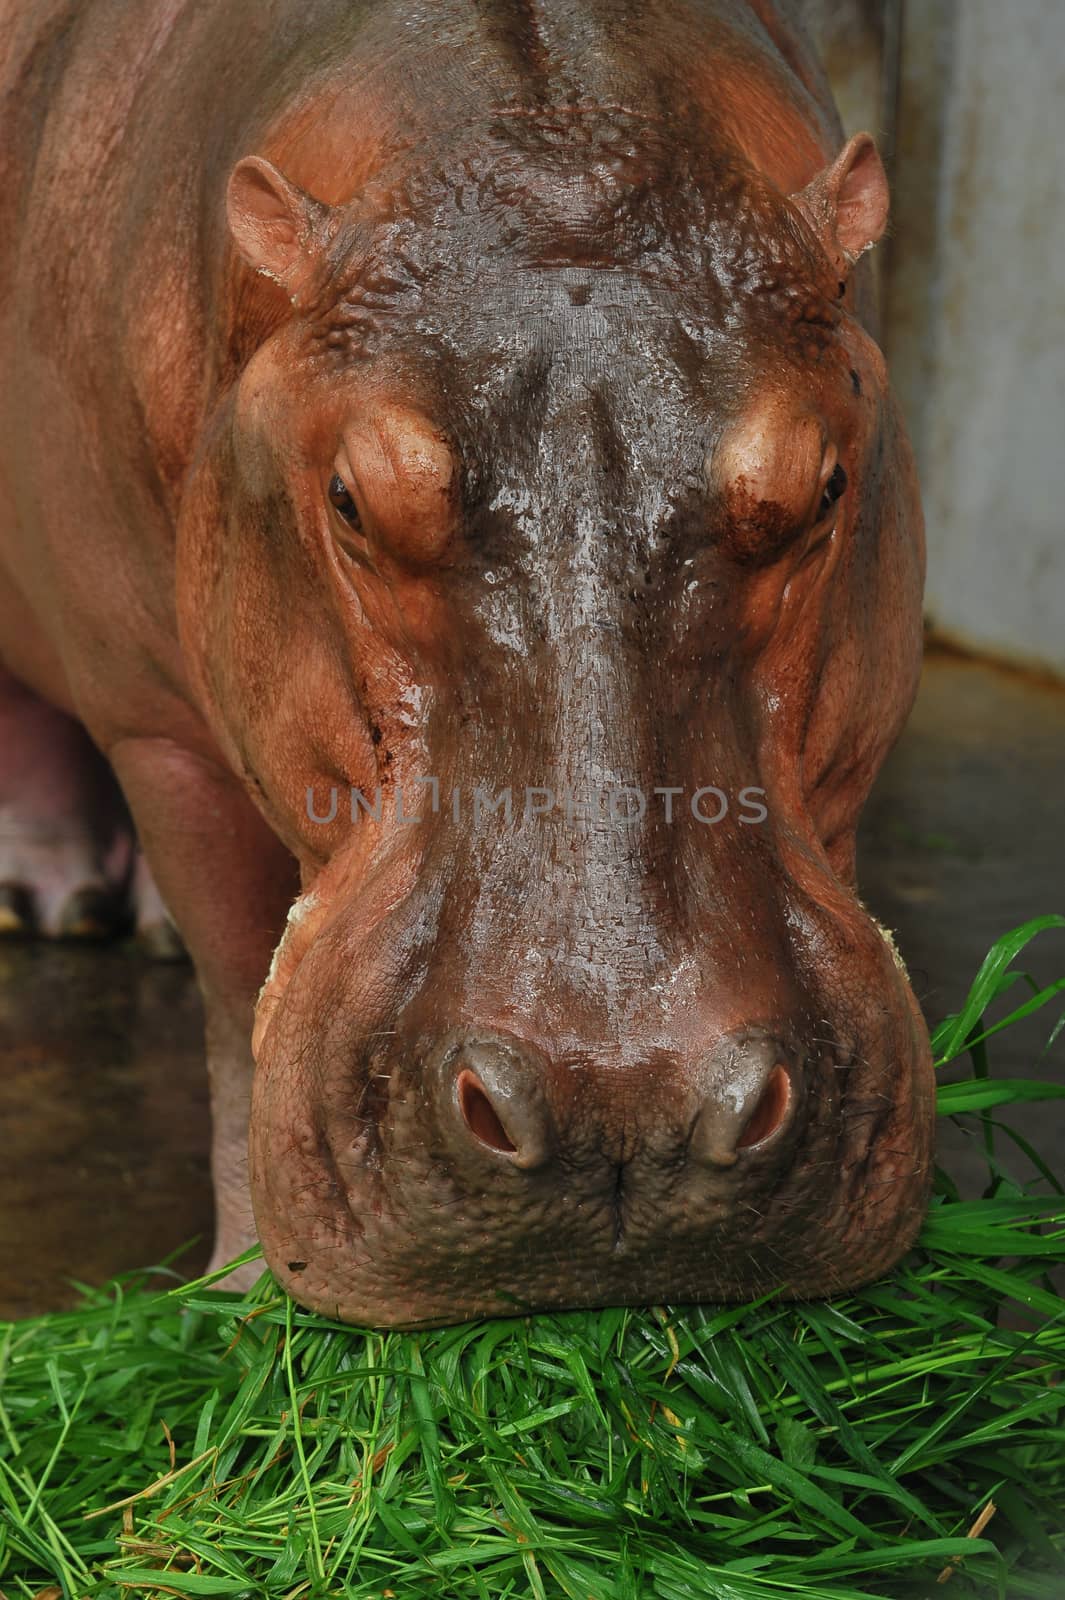 The Shot of Hippopotamus eating on the ground taken in the zoo.